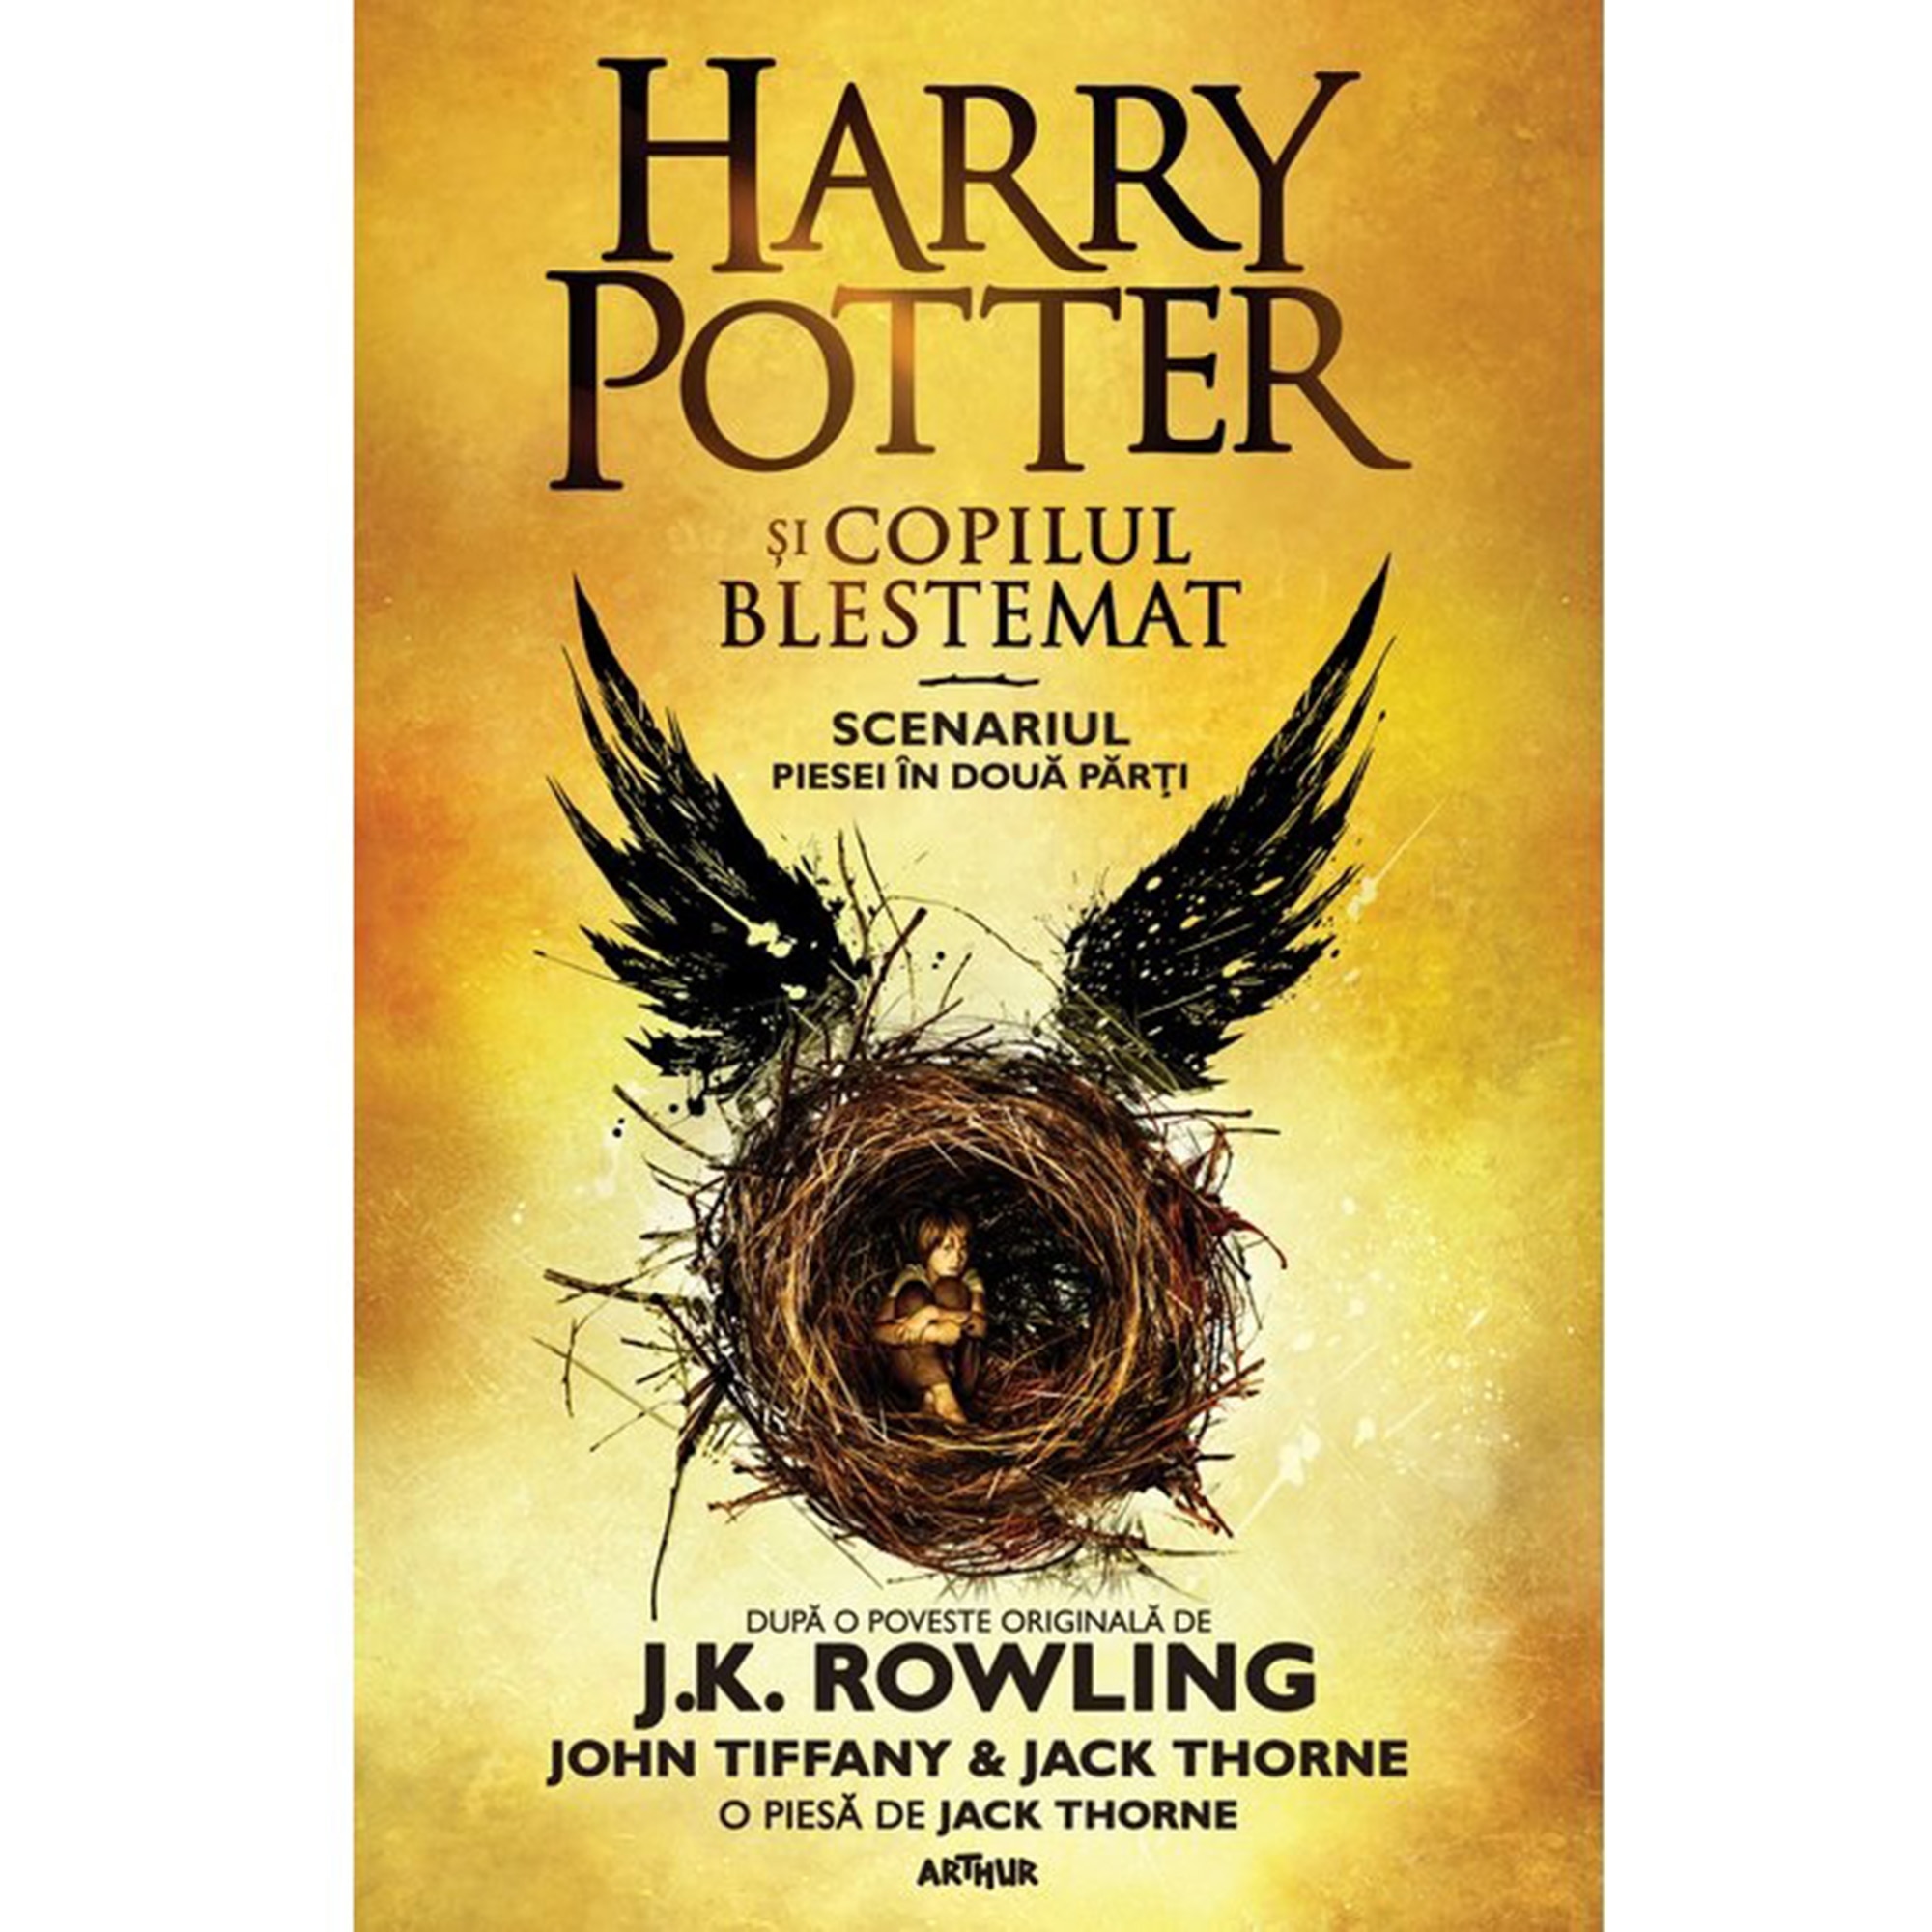 Theoretical String Brig Harry Potter 8 …si copilul blestemat, J.K. Rowling - eMAG.ro